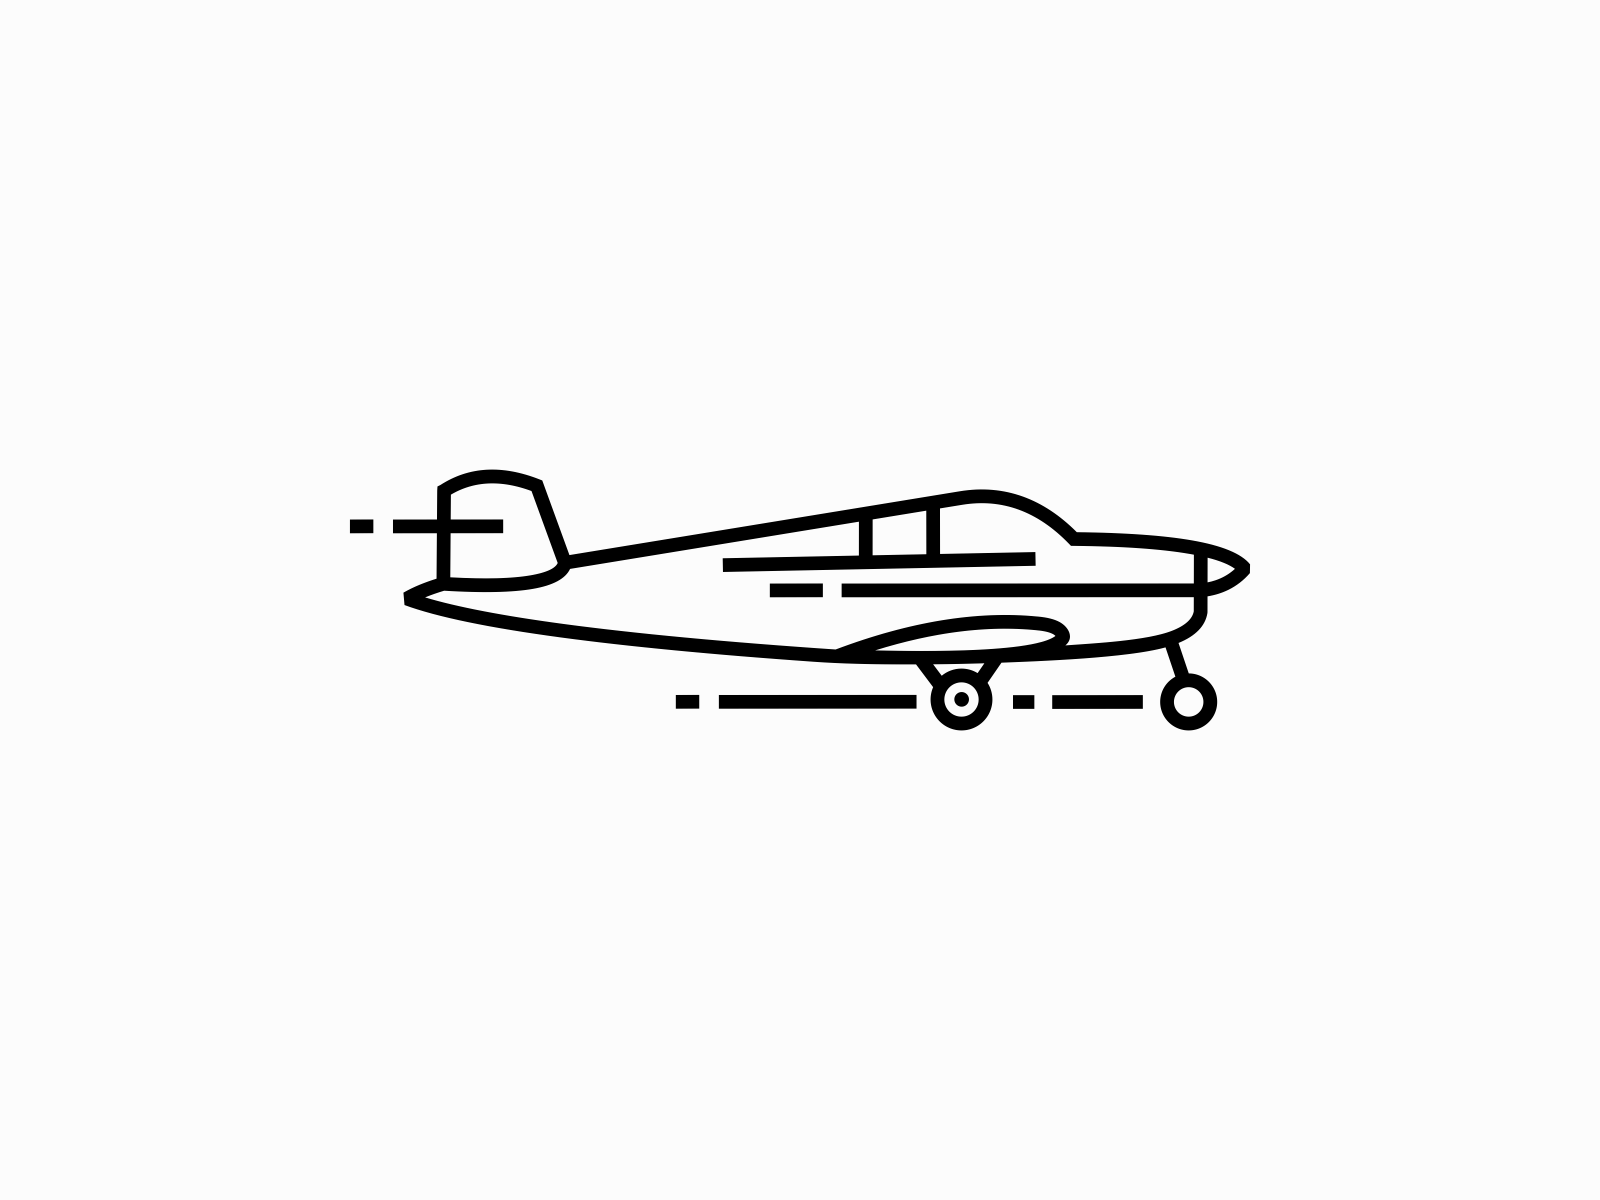 Airplane PNG Transparent Images Free Download - Pngfre